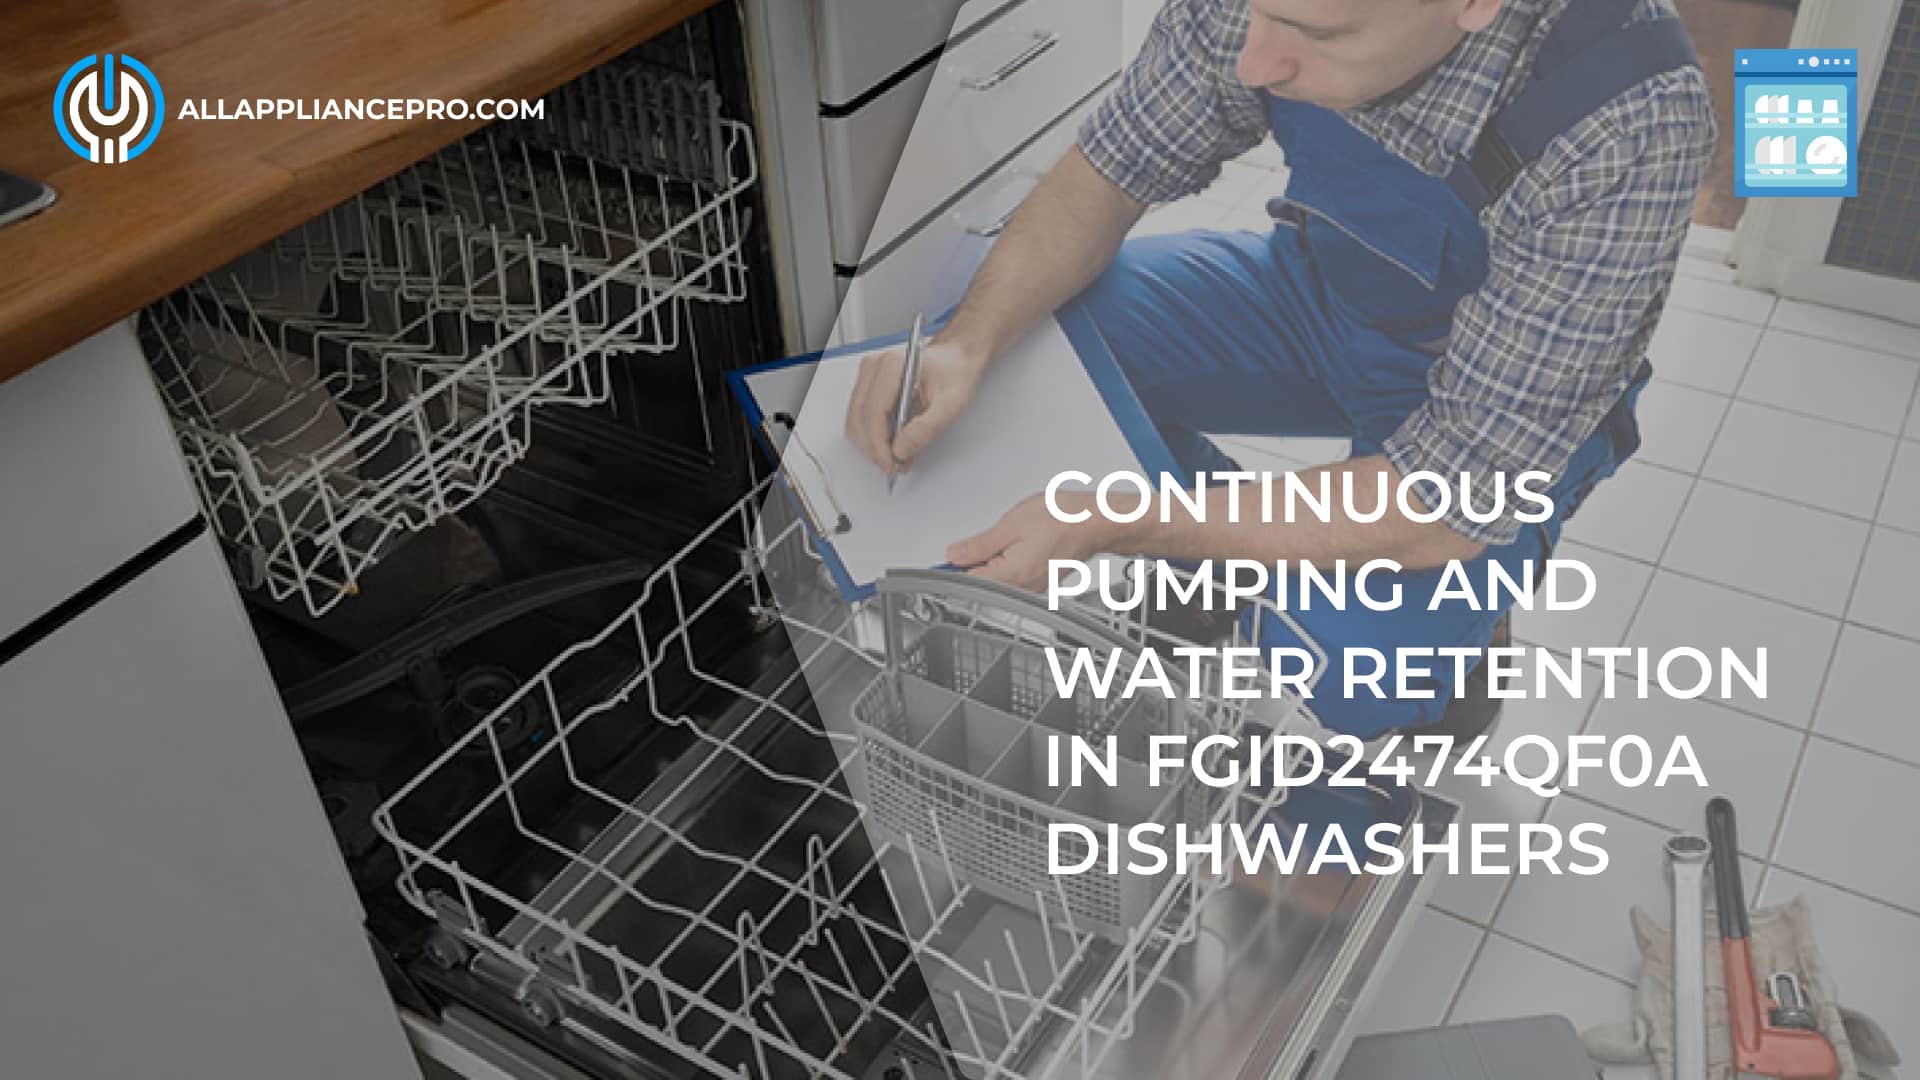 Continuous Pumping and Water Retention in FGID2474QF0A Dishwashers